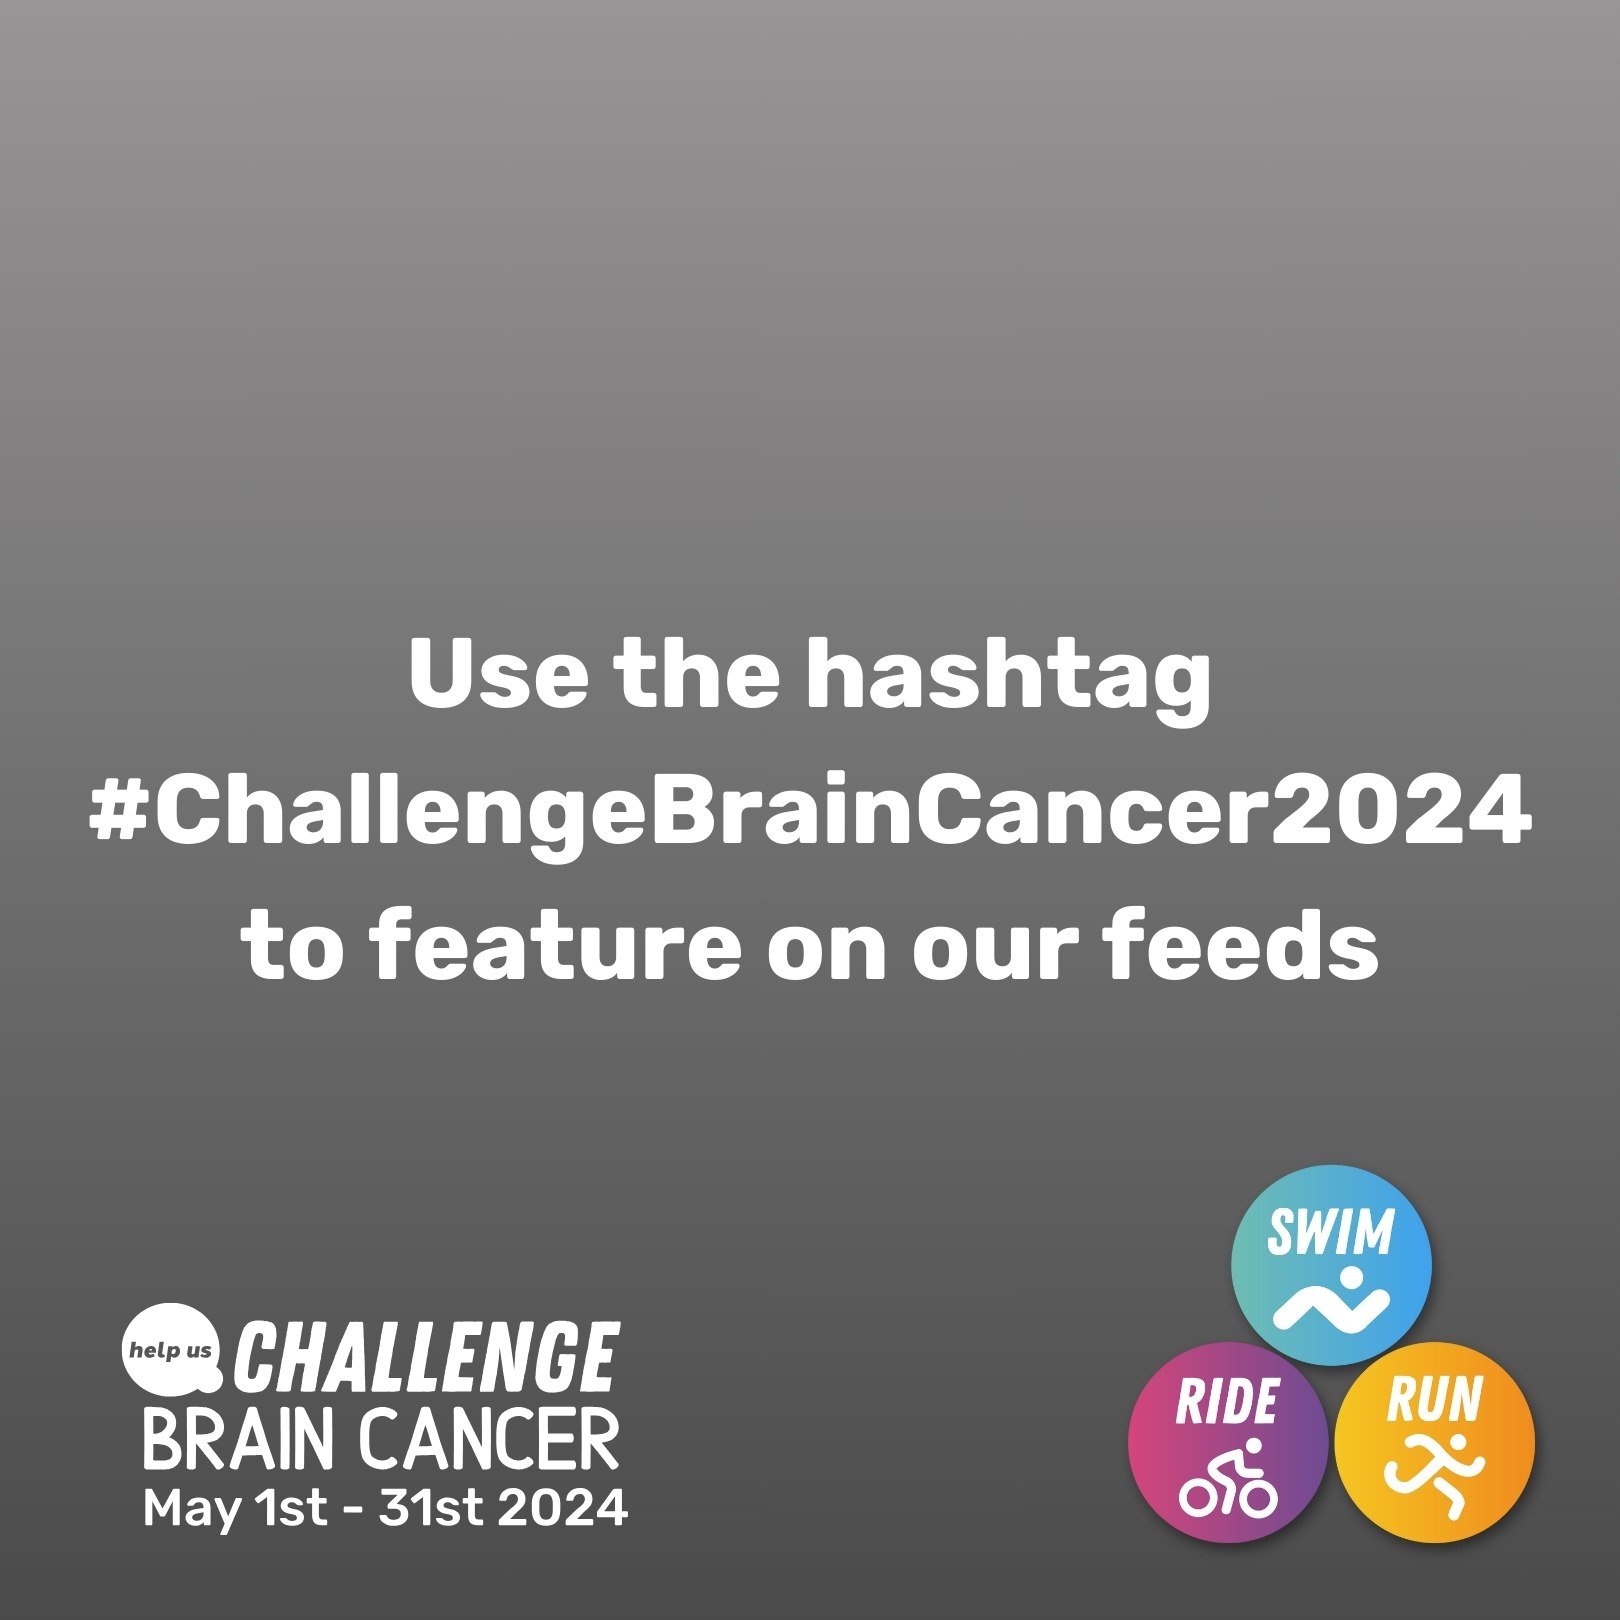 Use the hashtag #ChallengeBrainCancer2024 for a chance to feature on our feeds throughout May as you complete Challenge Brain Cancer! Every step, lap, and ride helps to raise funds for Australians affected by a brain cancer diagnosis. https://challen